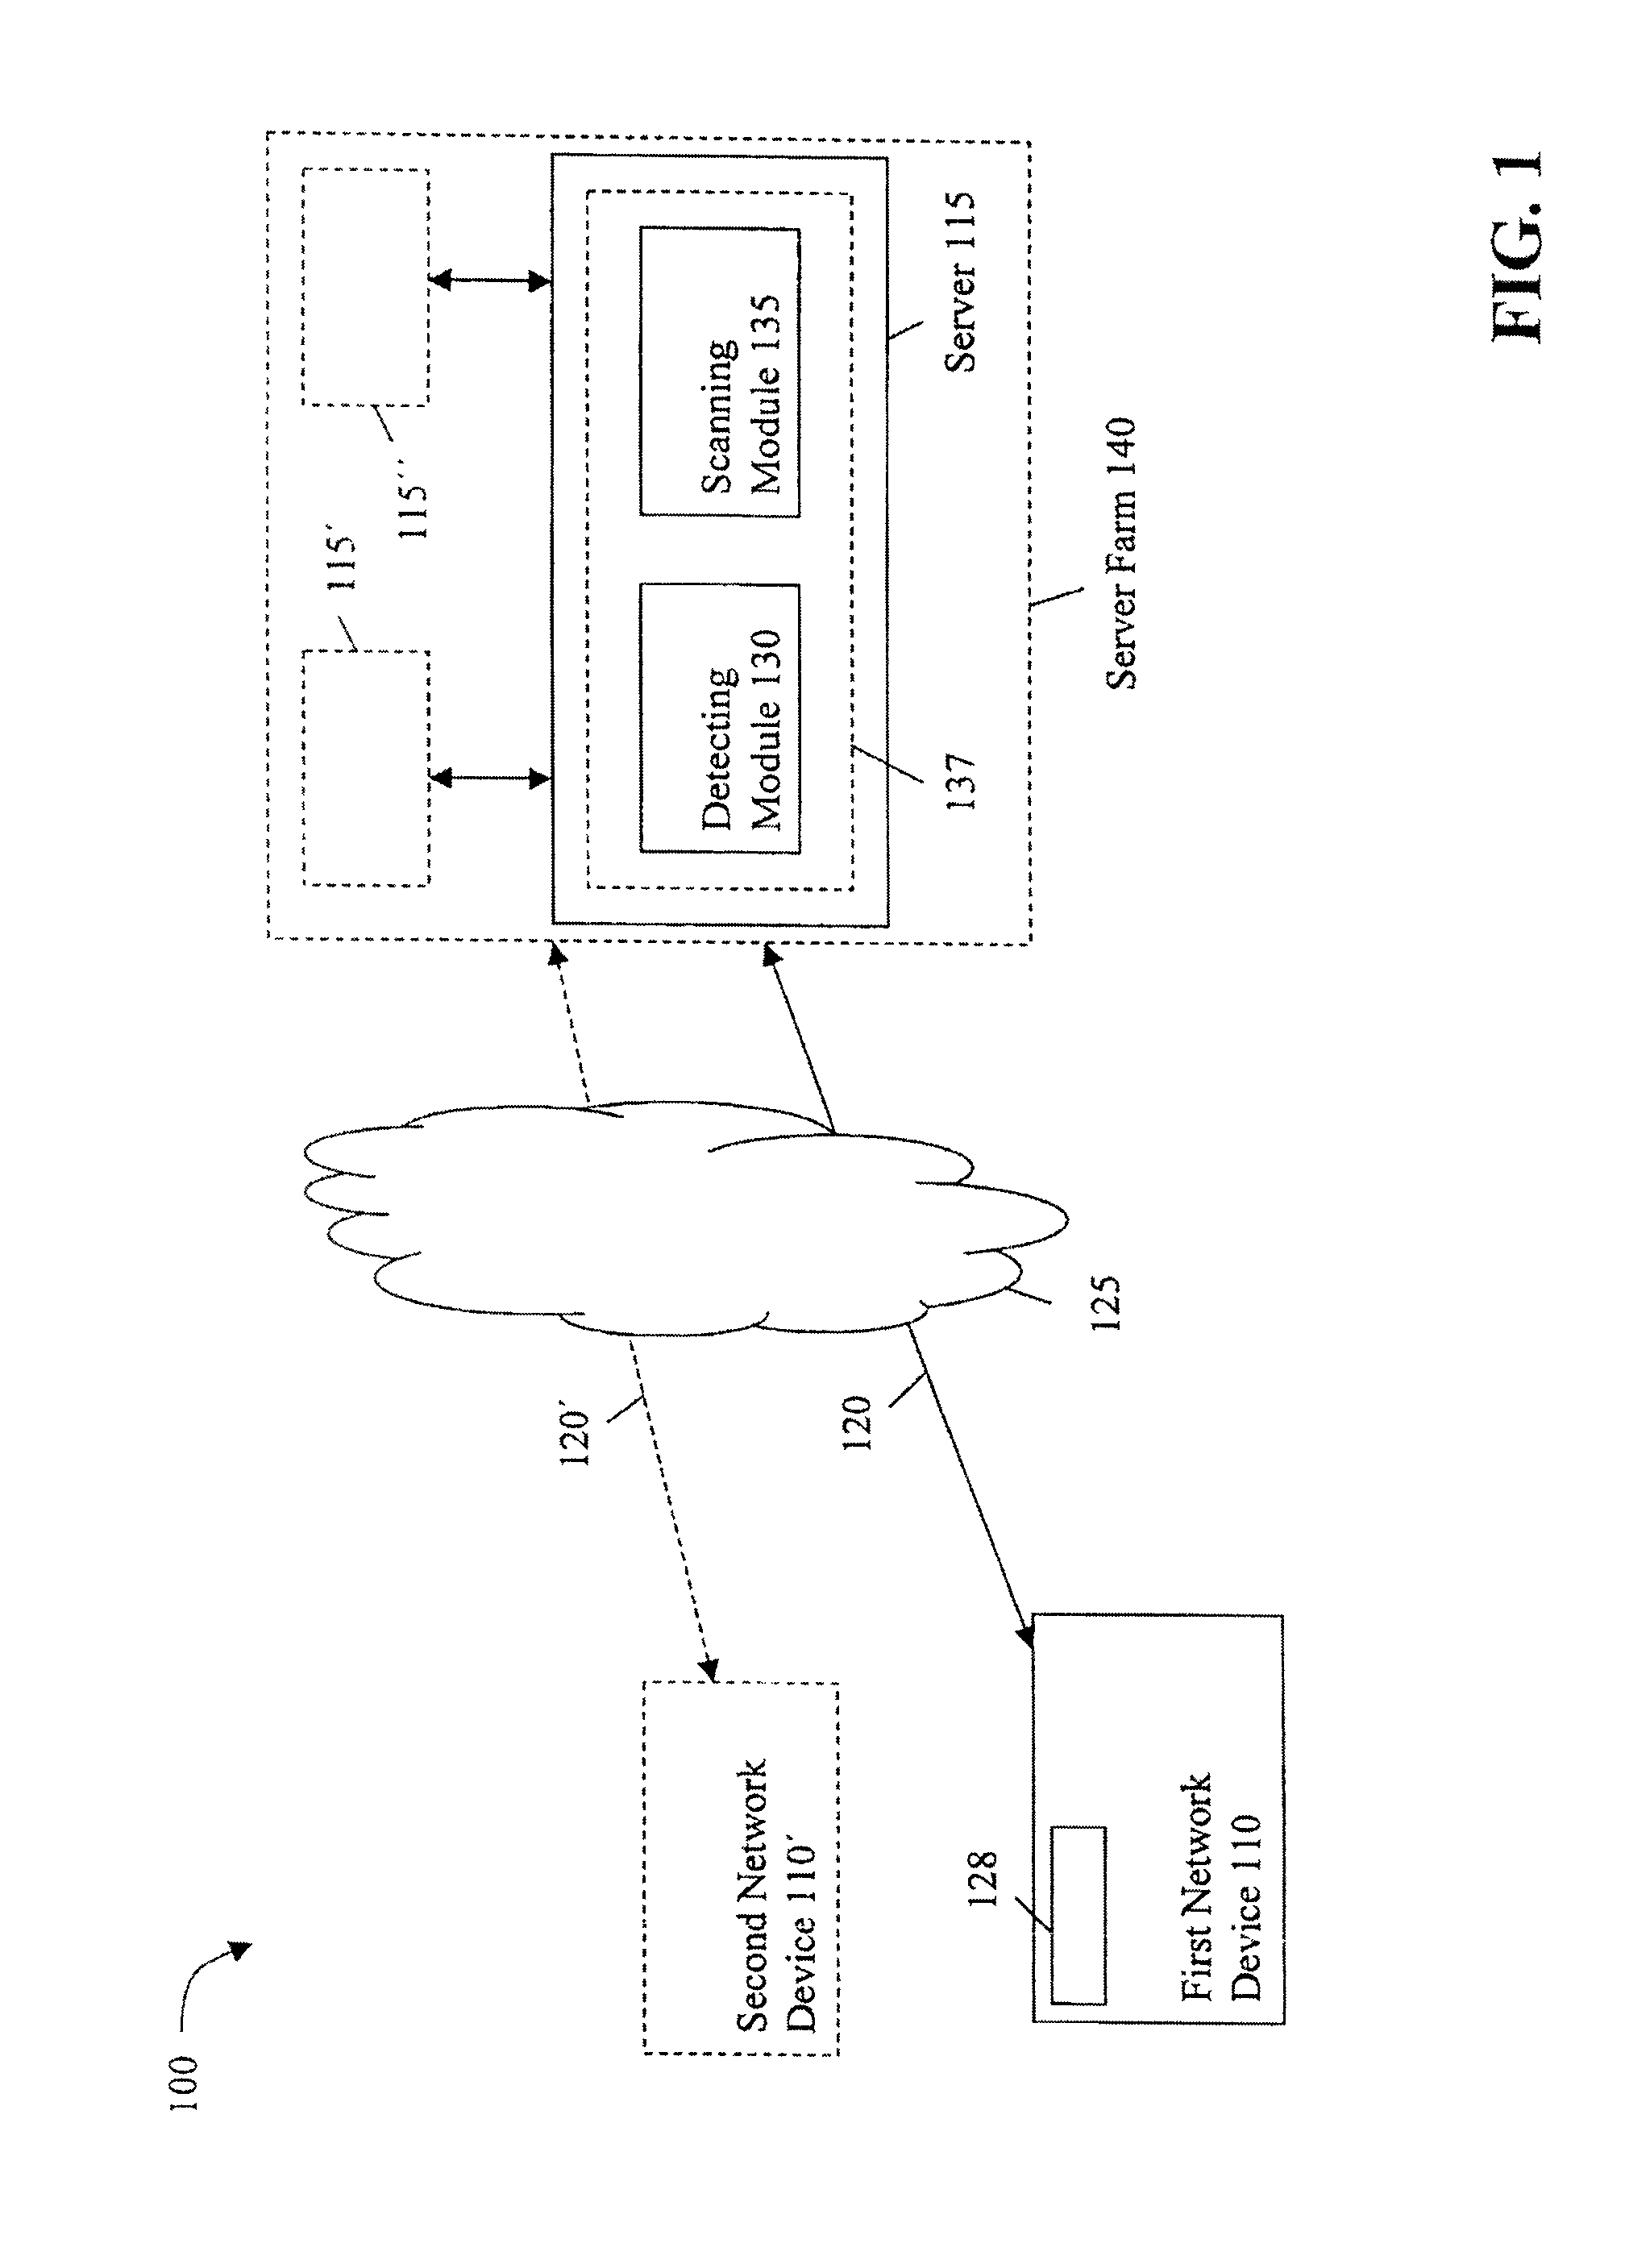 Method and system for scanning network devices